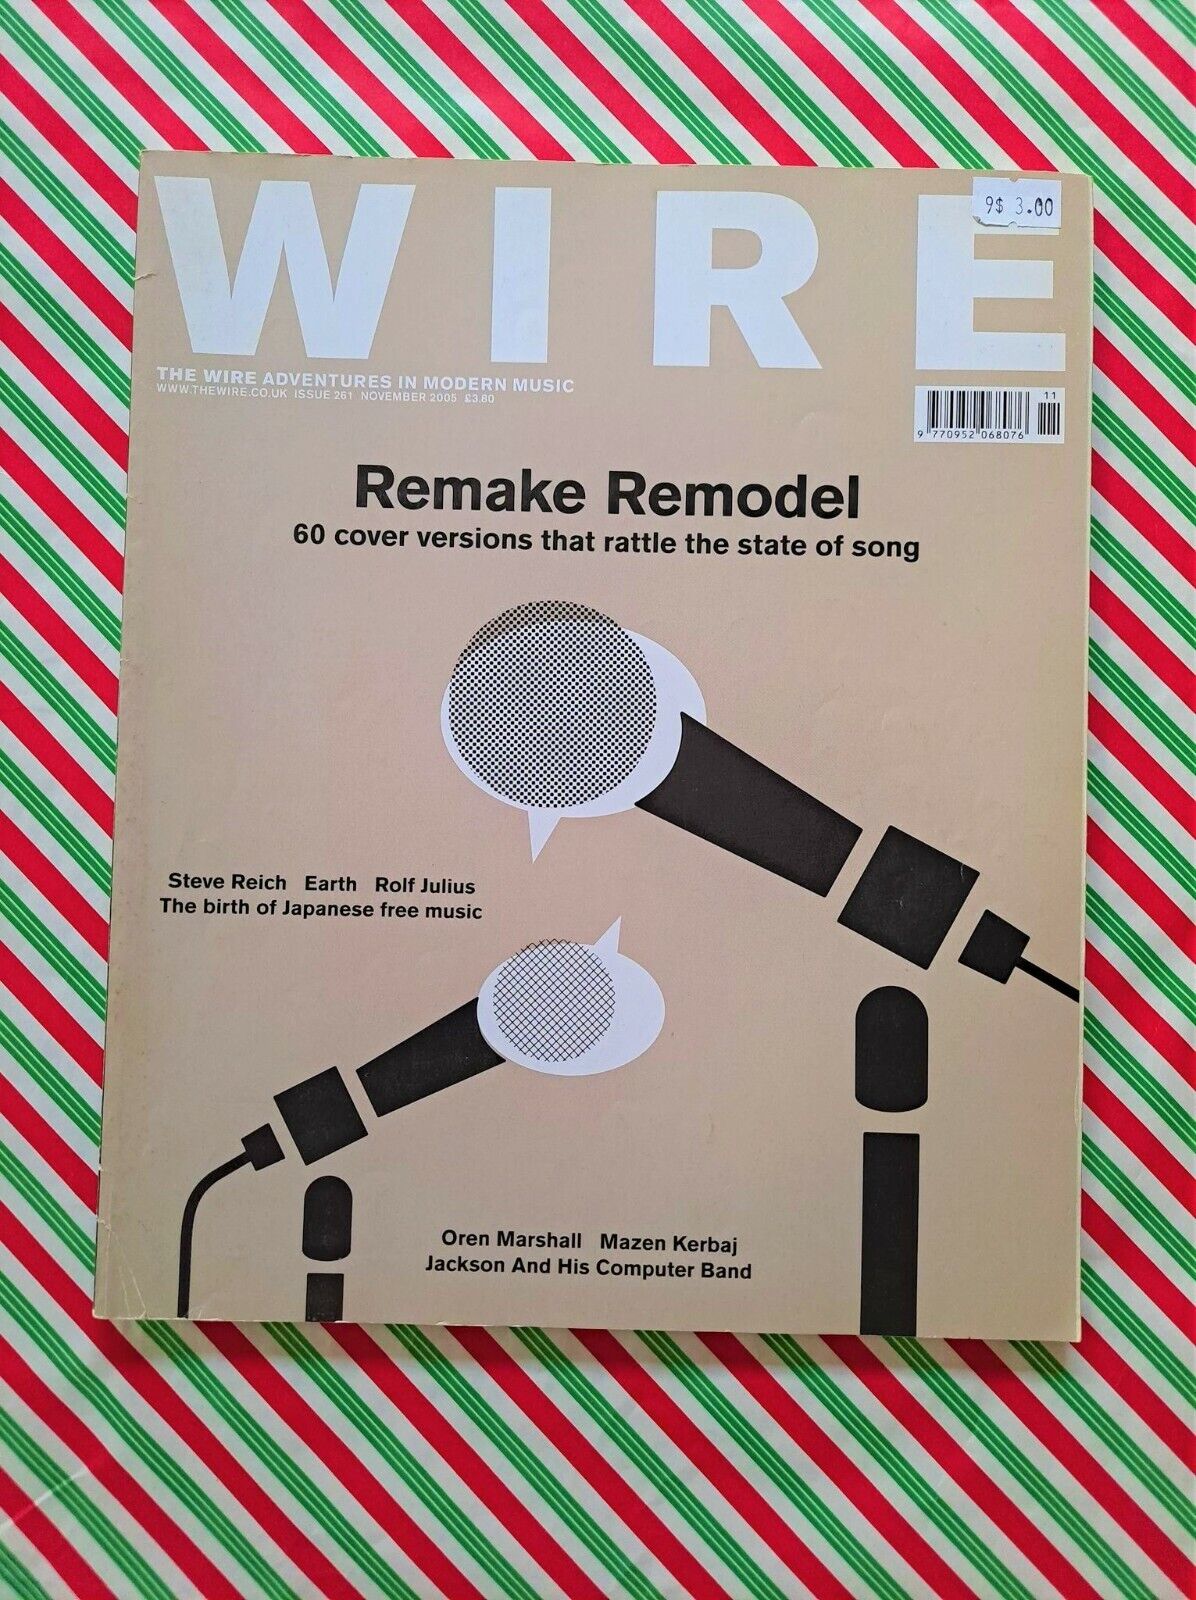 The Wire Magazine - November 2005 - Issue 261. Cover: Remake Remodel